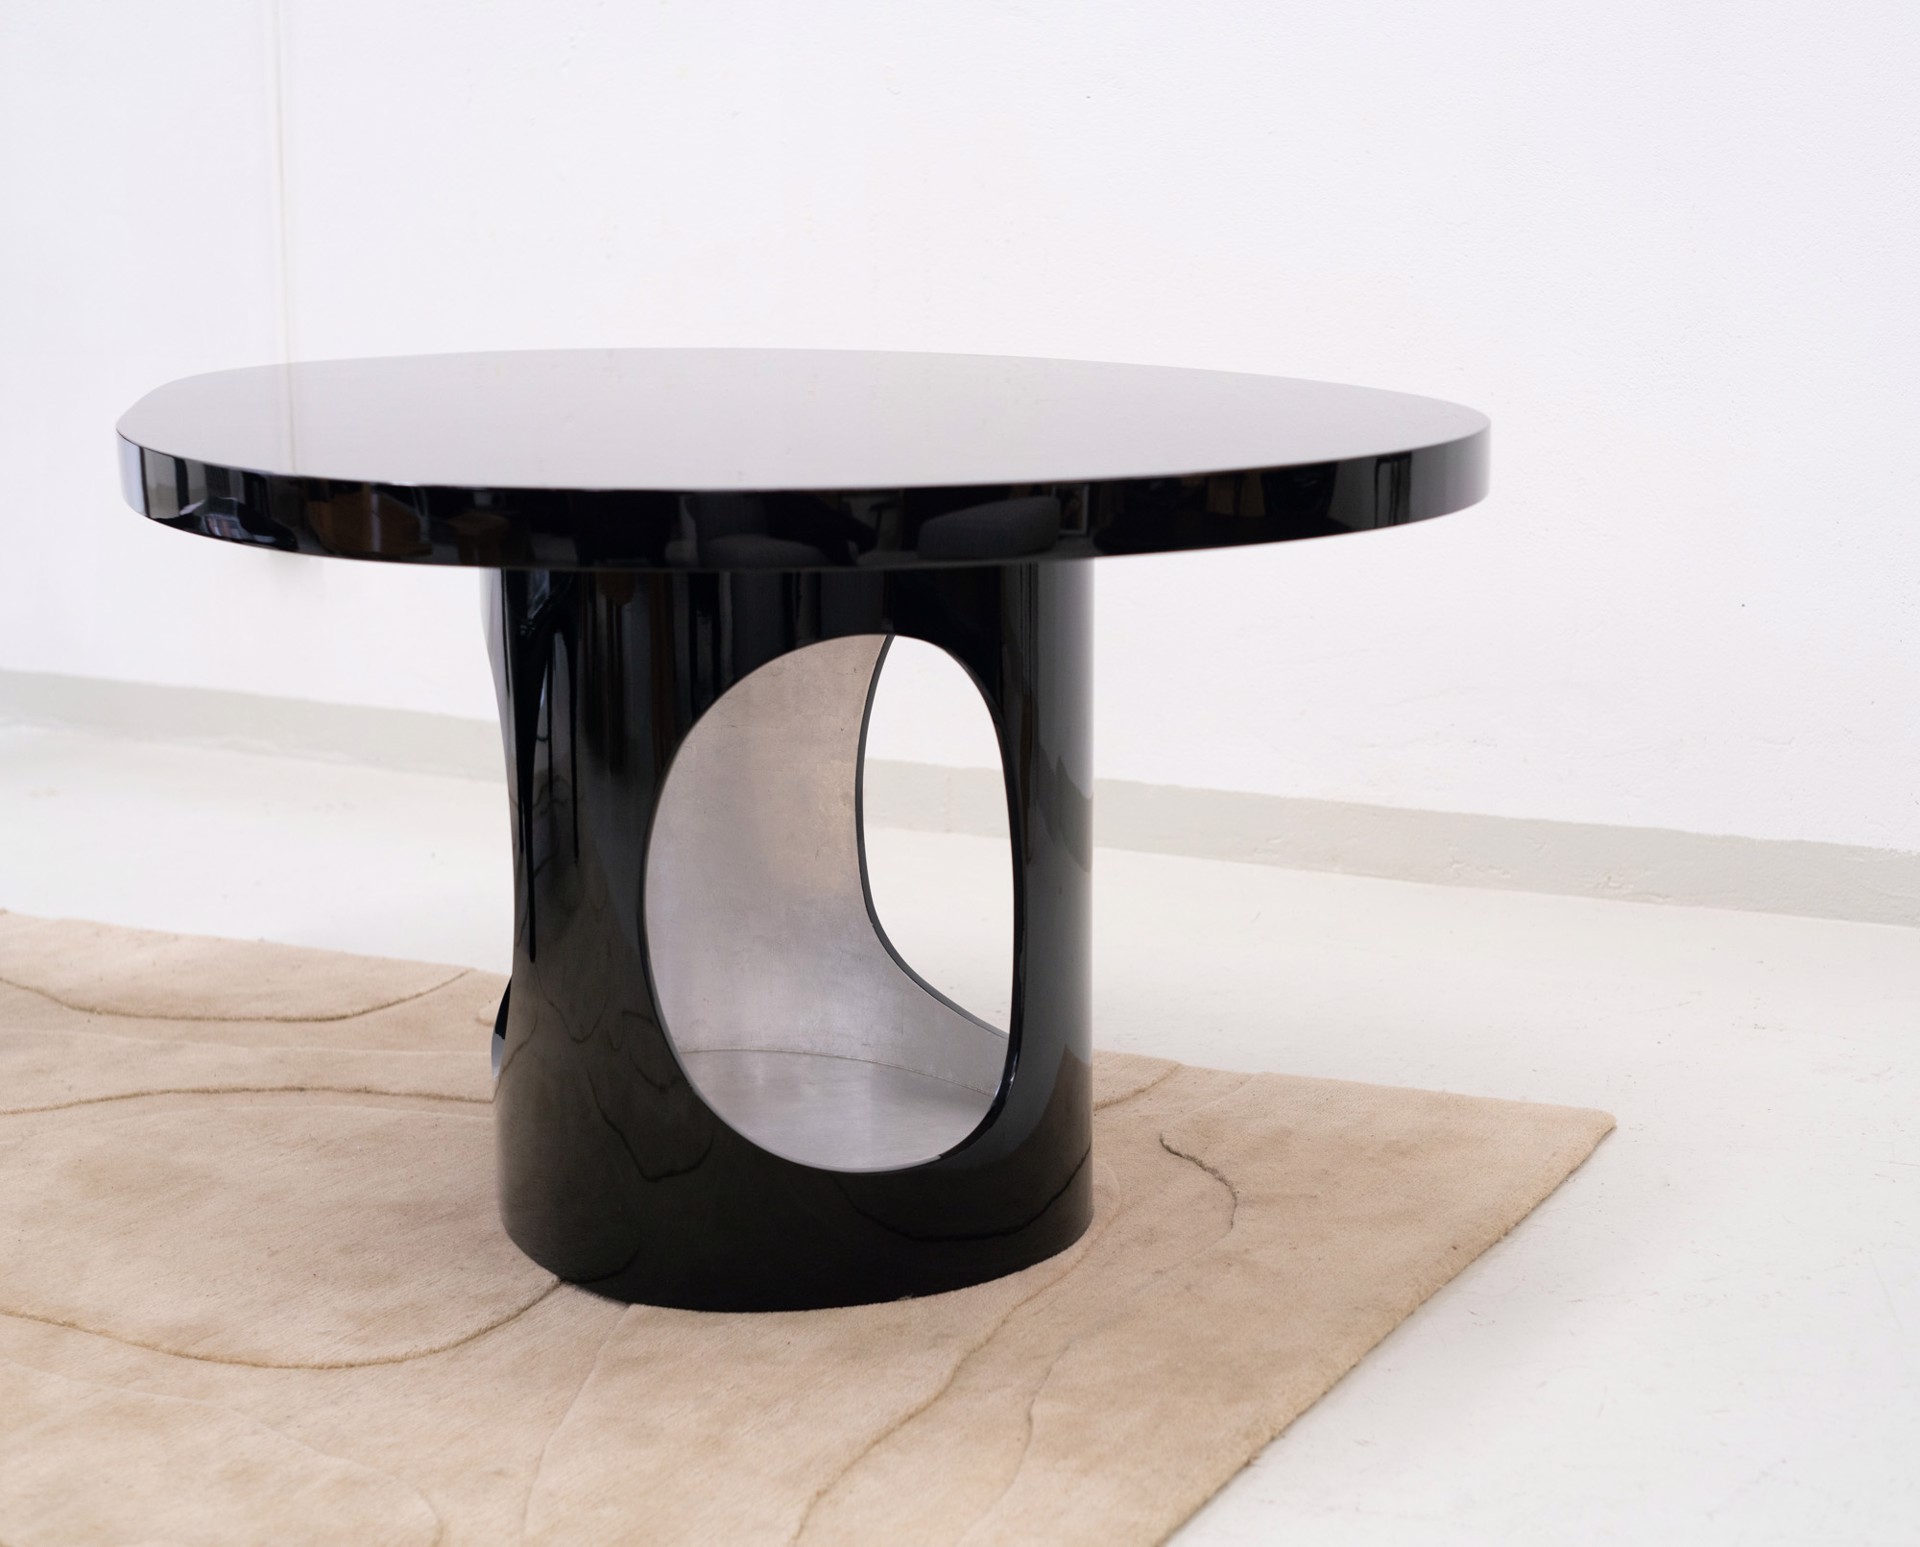 Custom "Cloud" Center table by Jacques Jarrige